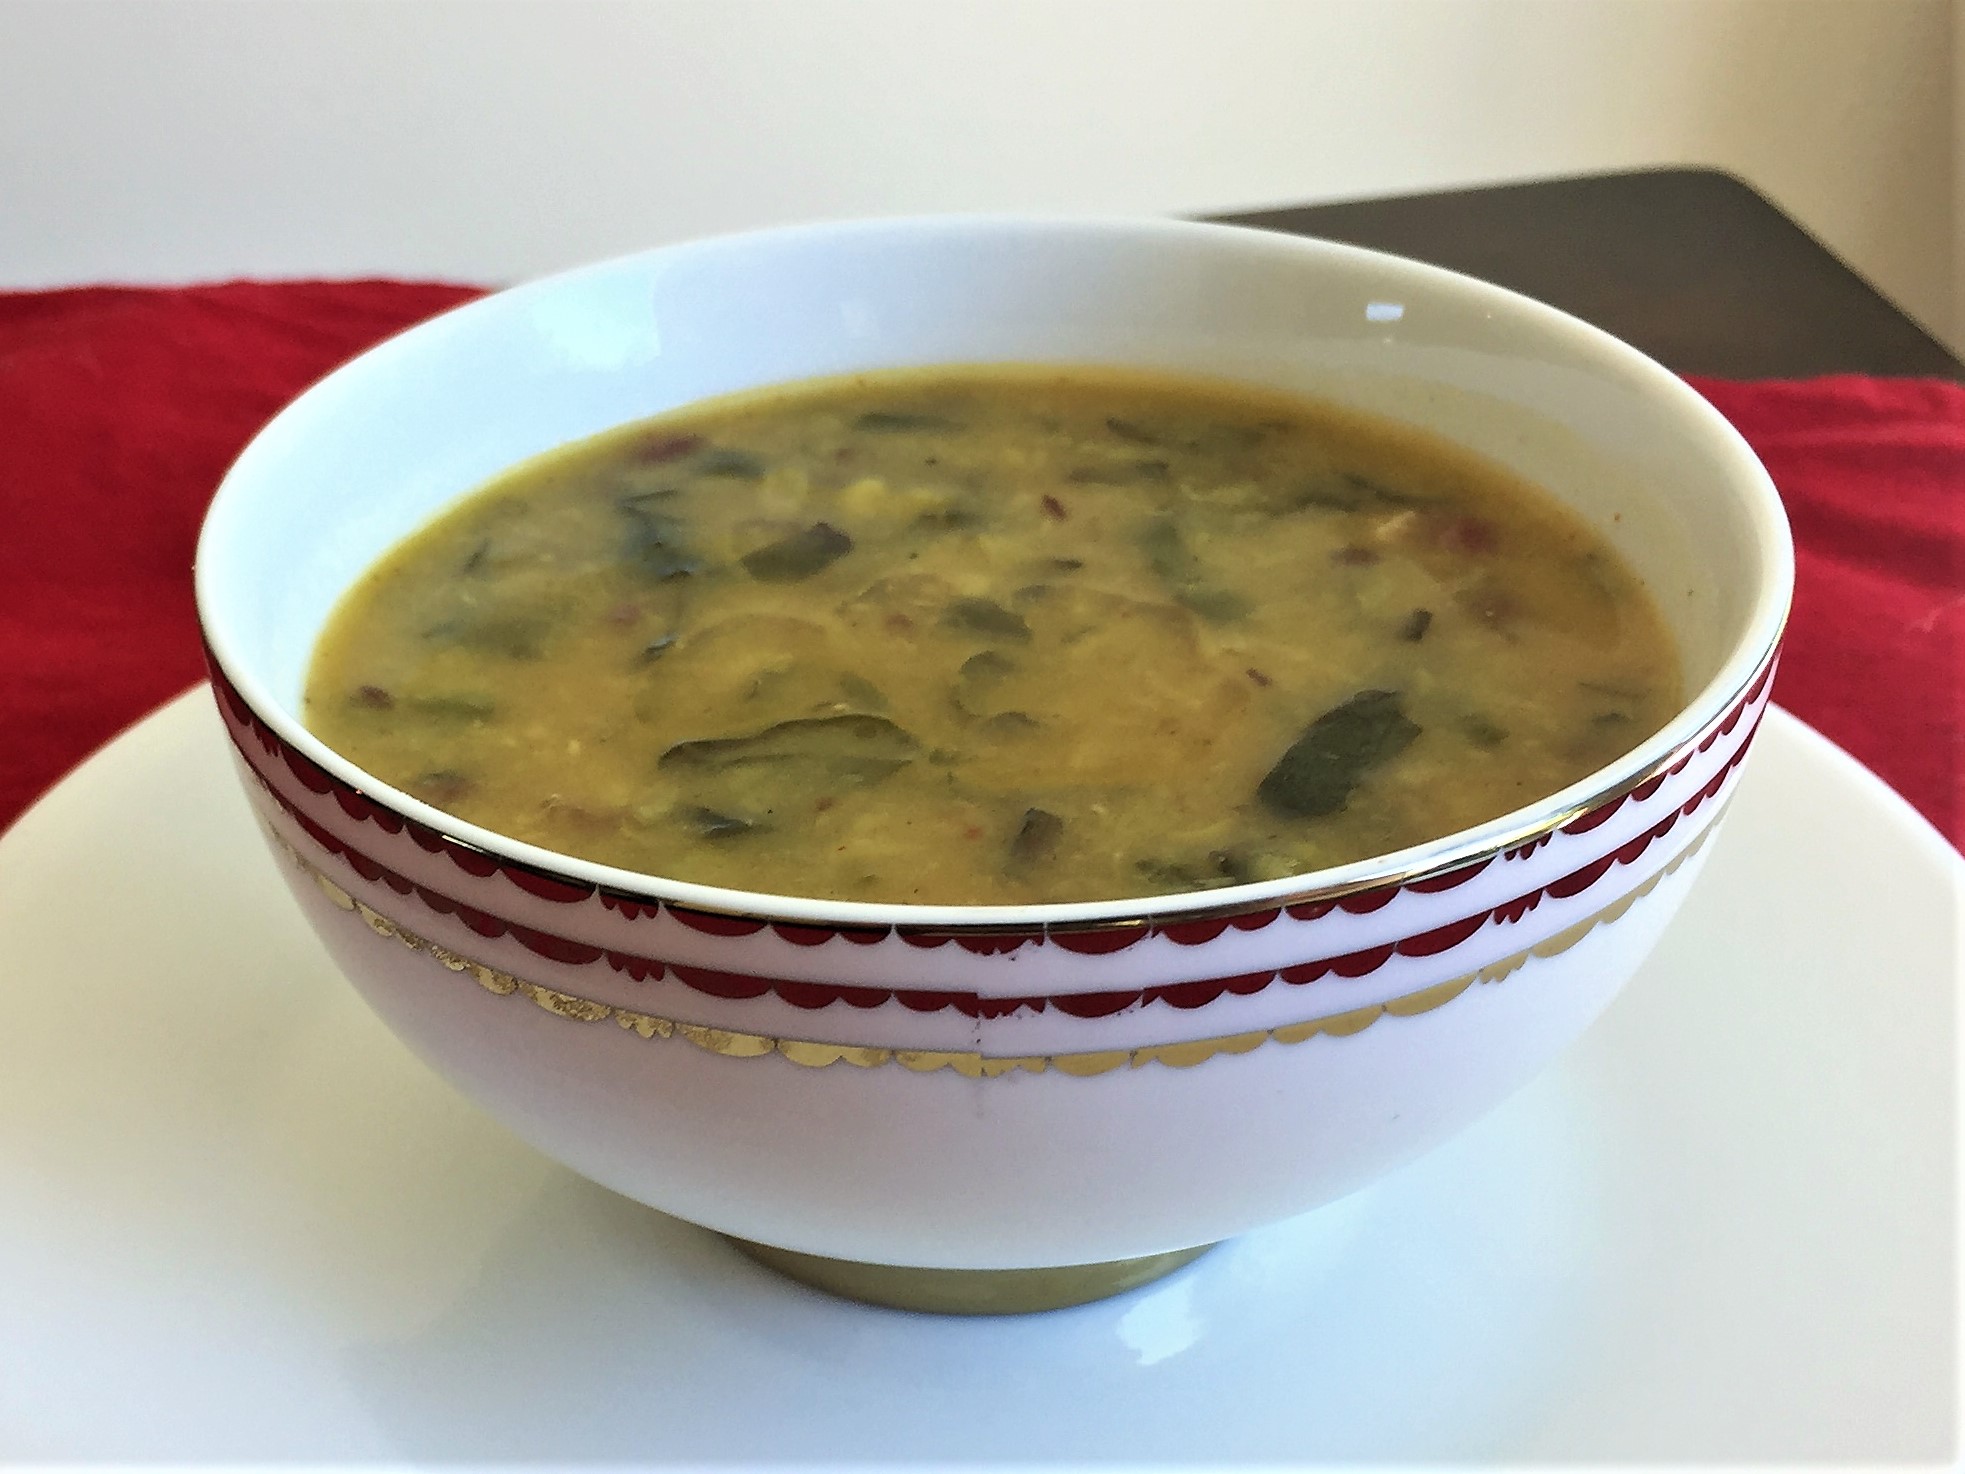 Moong daal/yellow lentils with beet greens - The Kitchen Docs